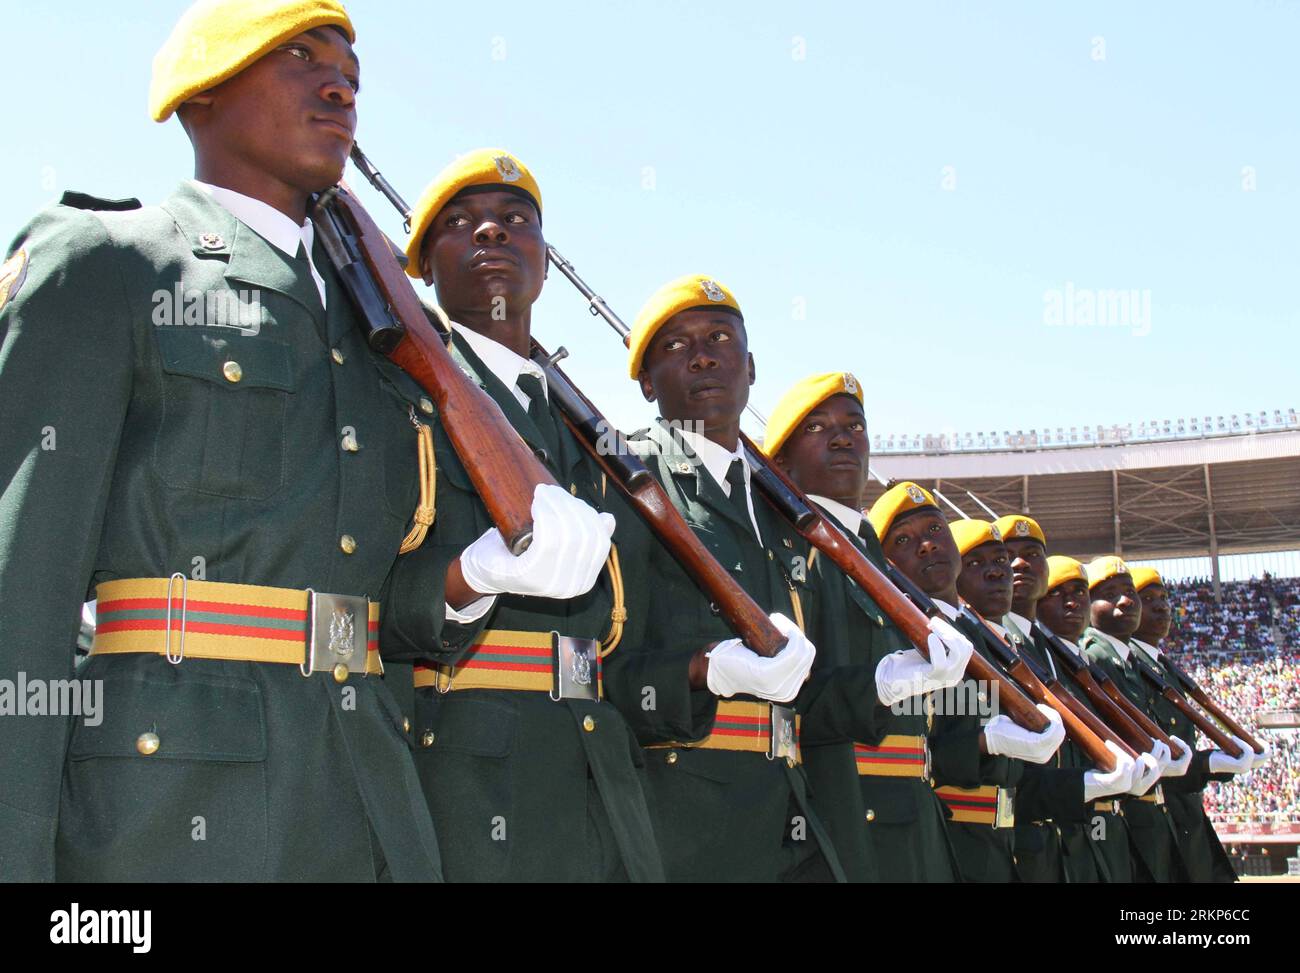 Bildnummer: 57910945  Datum: 18.04.2012  Copyright: imago/Xinhua (120418) -- HARARE, April 18, 2012 (Xinhua) -- Members of Zimbabwean forces participate in a military review marking the 32nd anniversary of Zimbabwe s independence at the National Sports Stadium in Harare, capital of Zimbabwe, on April 18, 2012. The main celebrations of Zimbabwe s 32 years of independence took place at the National Sports Stadium in Harare Wednesday, with the theme being indigenization and empowerment for social and economic transformation . (Xinhua/Li Ping) (zjl) ZIMBABWE-HARARE-32ND ANNIVERSARY-INDEPENDENCE PU Stock Photo